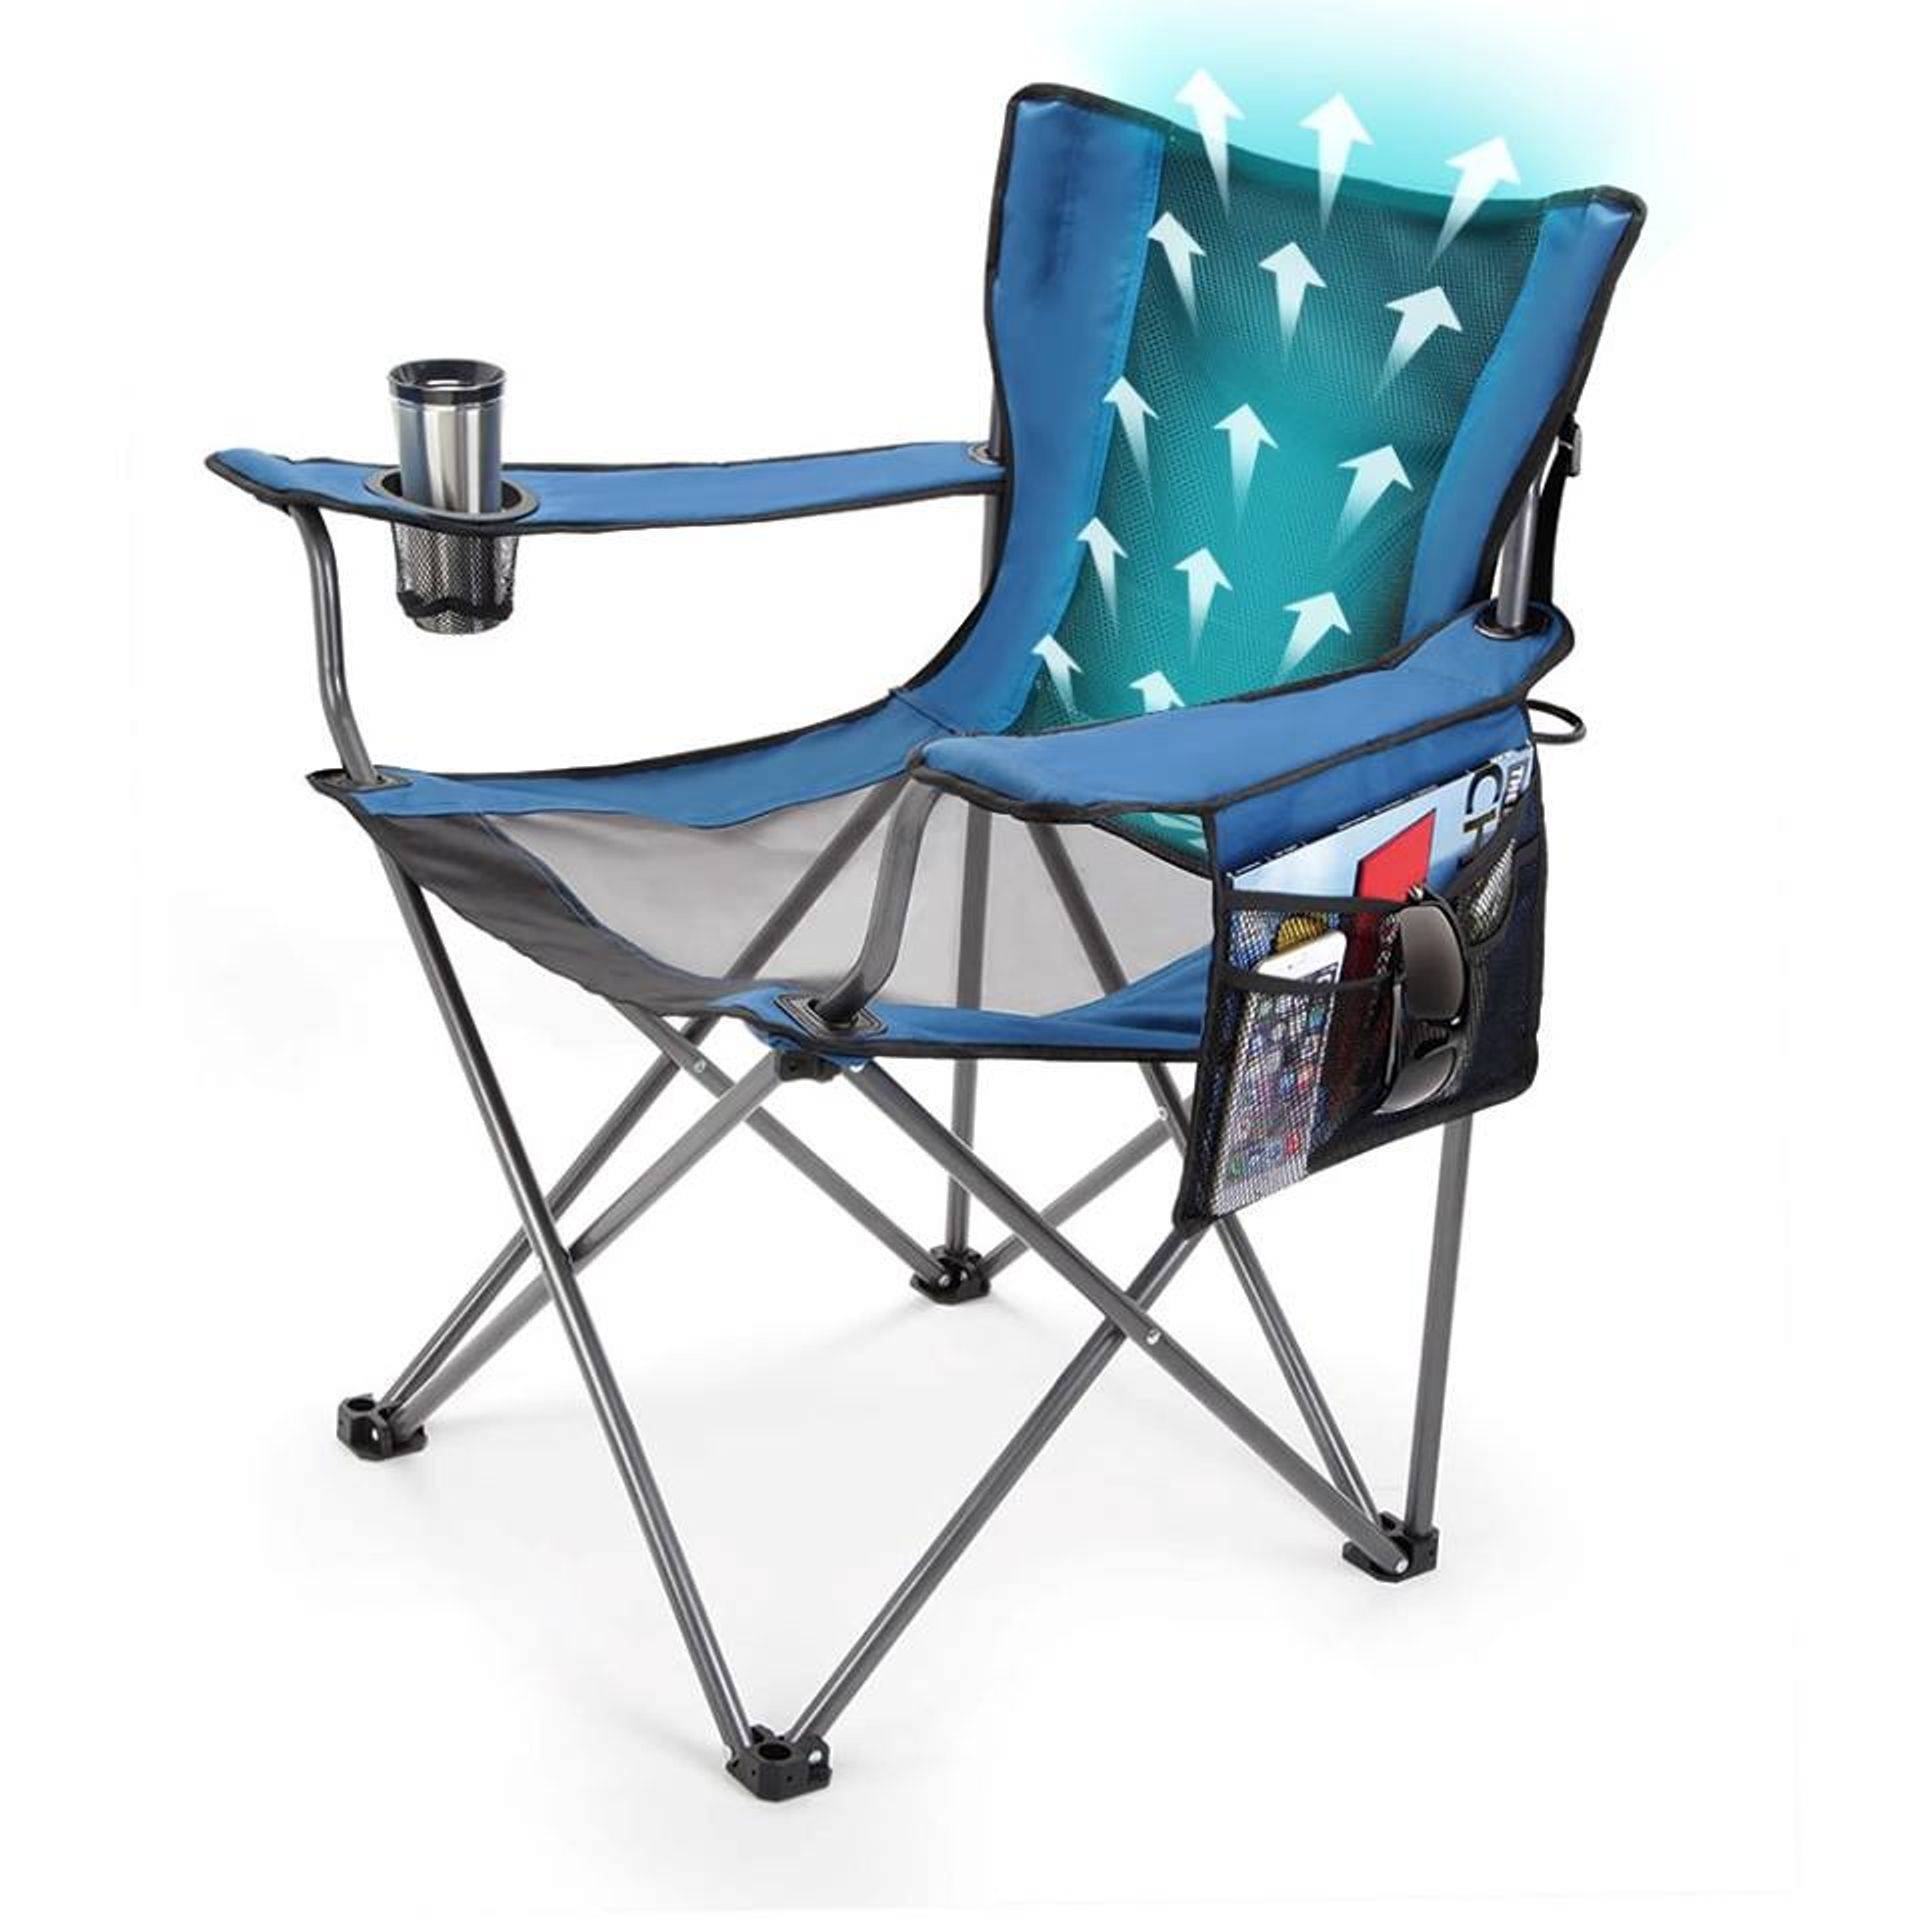 Traveling Breeze Cooling Chair Review - Tailgating Challenge